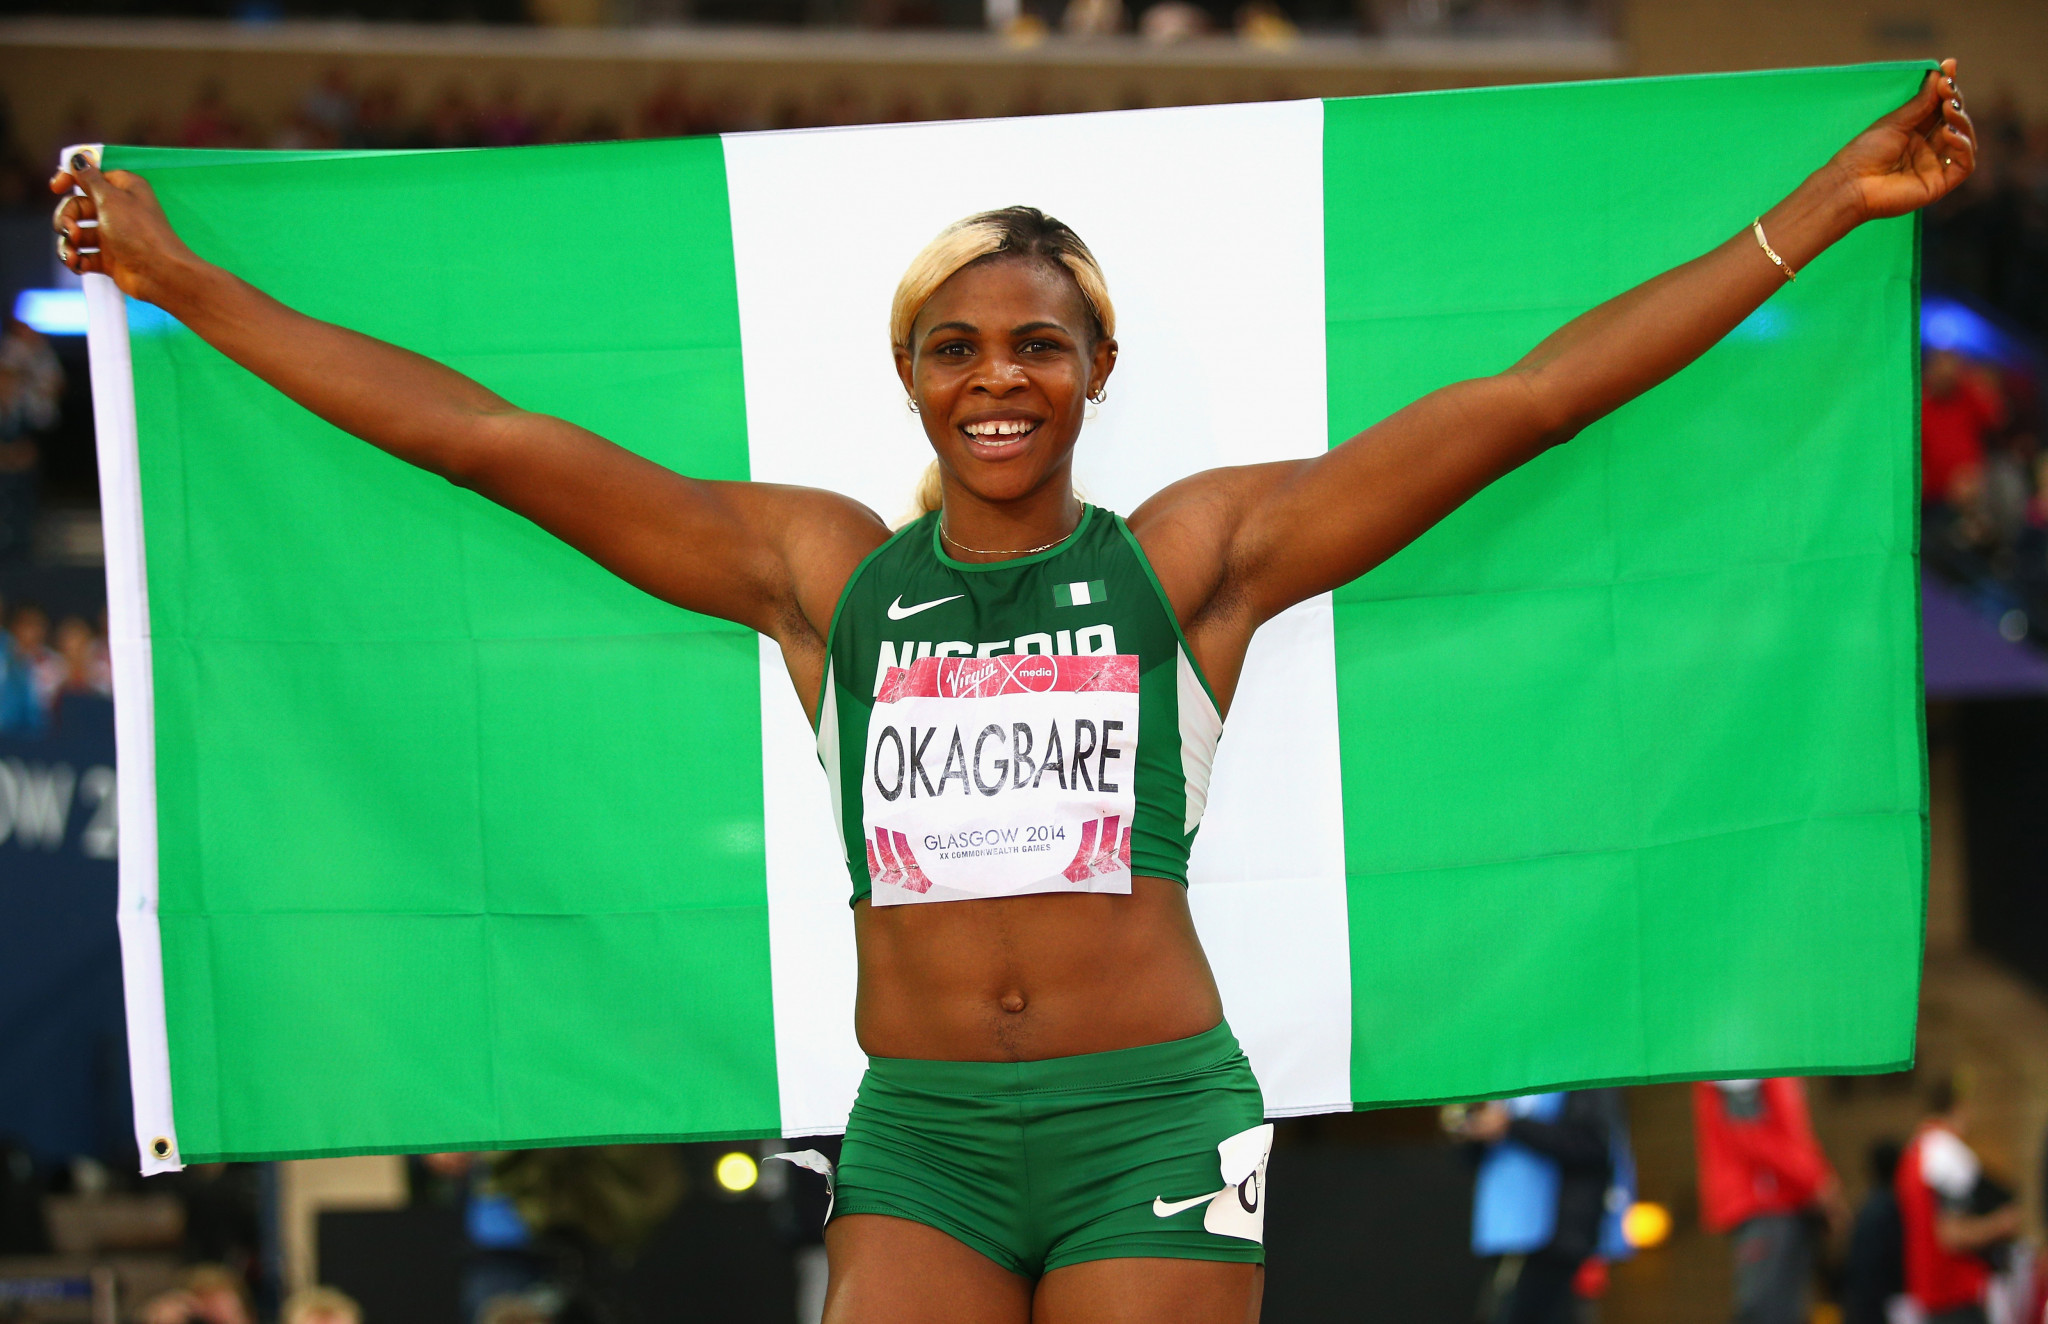 Glasgow 2014 100m and 200m gold medallist Blessing Okagbare missed last year's re-arranged Olympics in Tokyo after she was banned from competition for 10 years by the Athletics Integrity Unit ©Getty Images